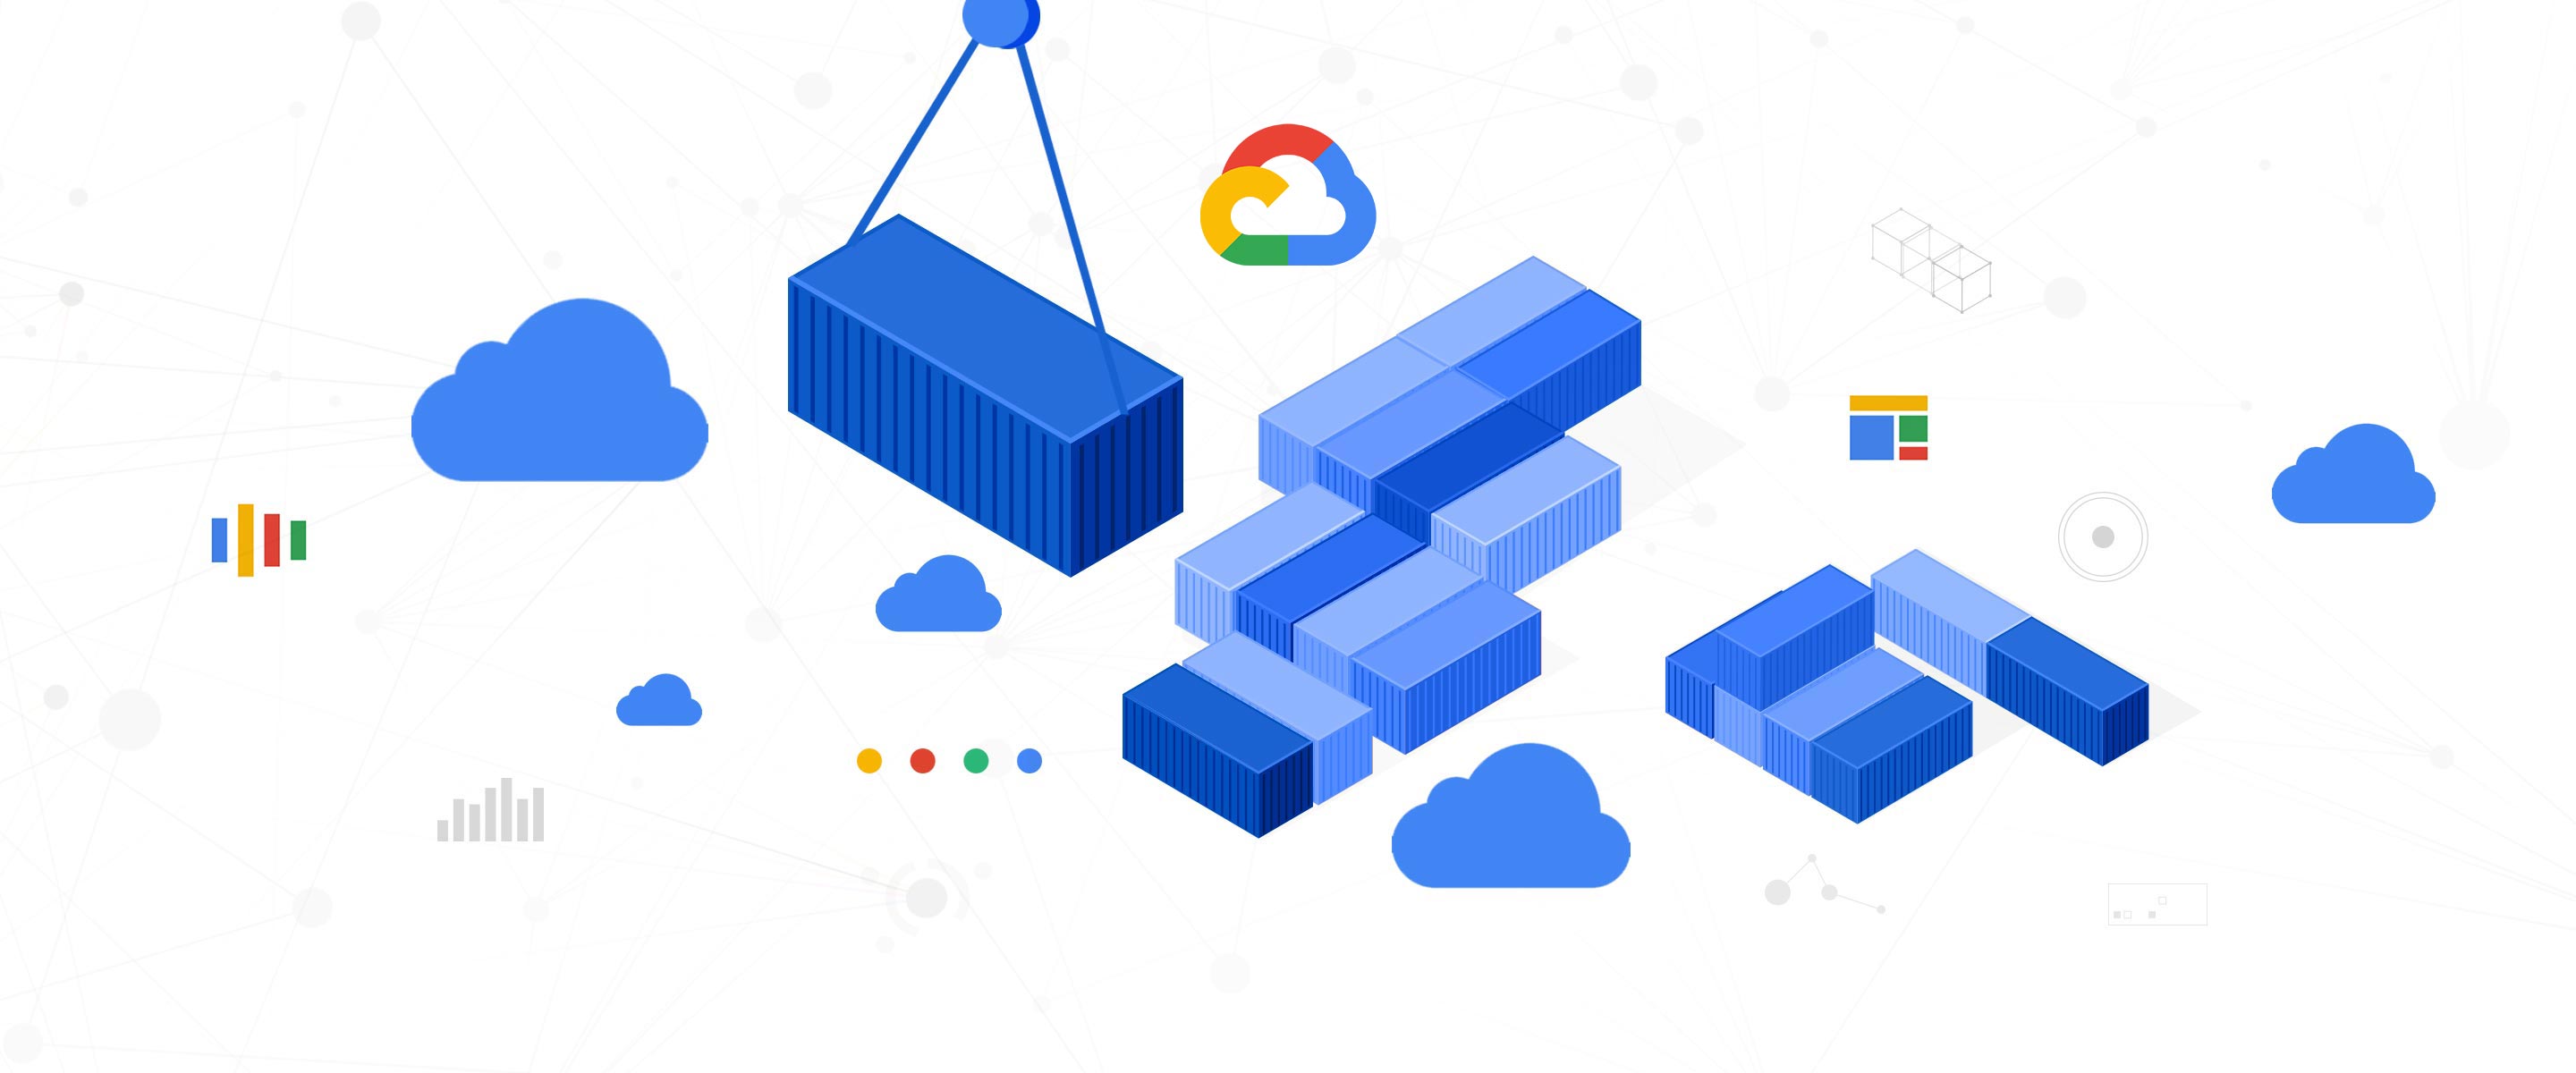 Three ways to deploy containers on GCP